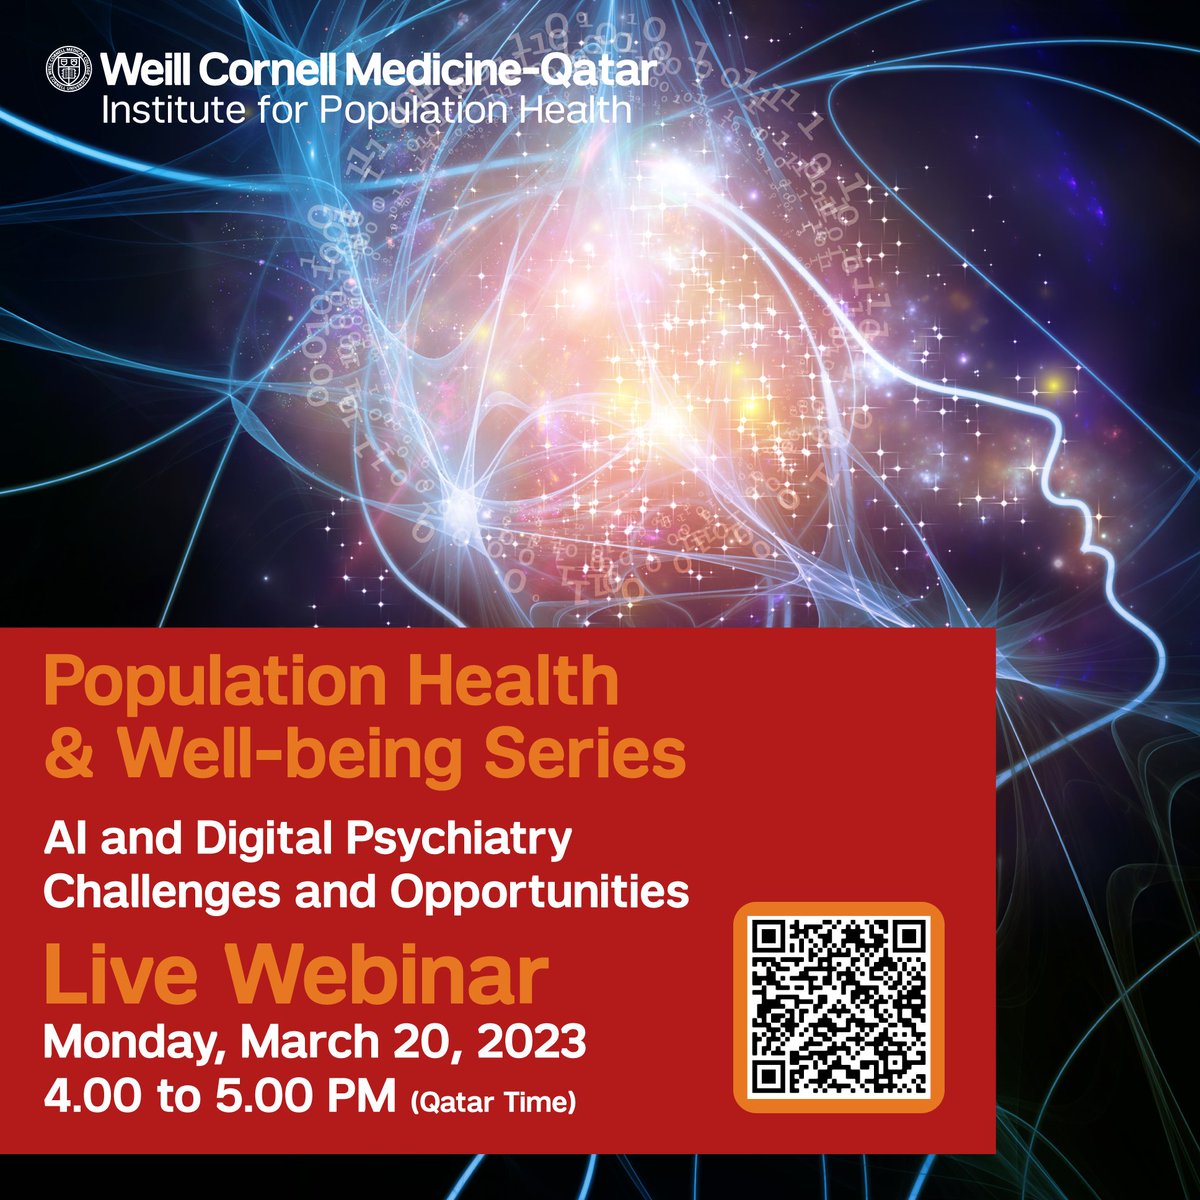 Join @jyotipathak and @IPHQatar for a live webinar on Monday, March 20, on the opportunities and challenges in AI and digital psychiatry. Register now by creating and signing into your CloudCME account: bit.ly/3Tnaslt 

#IPHQatar #WCM